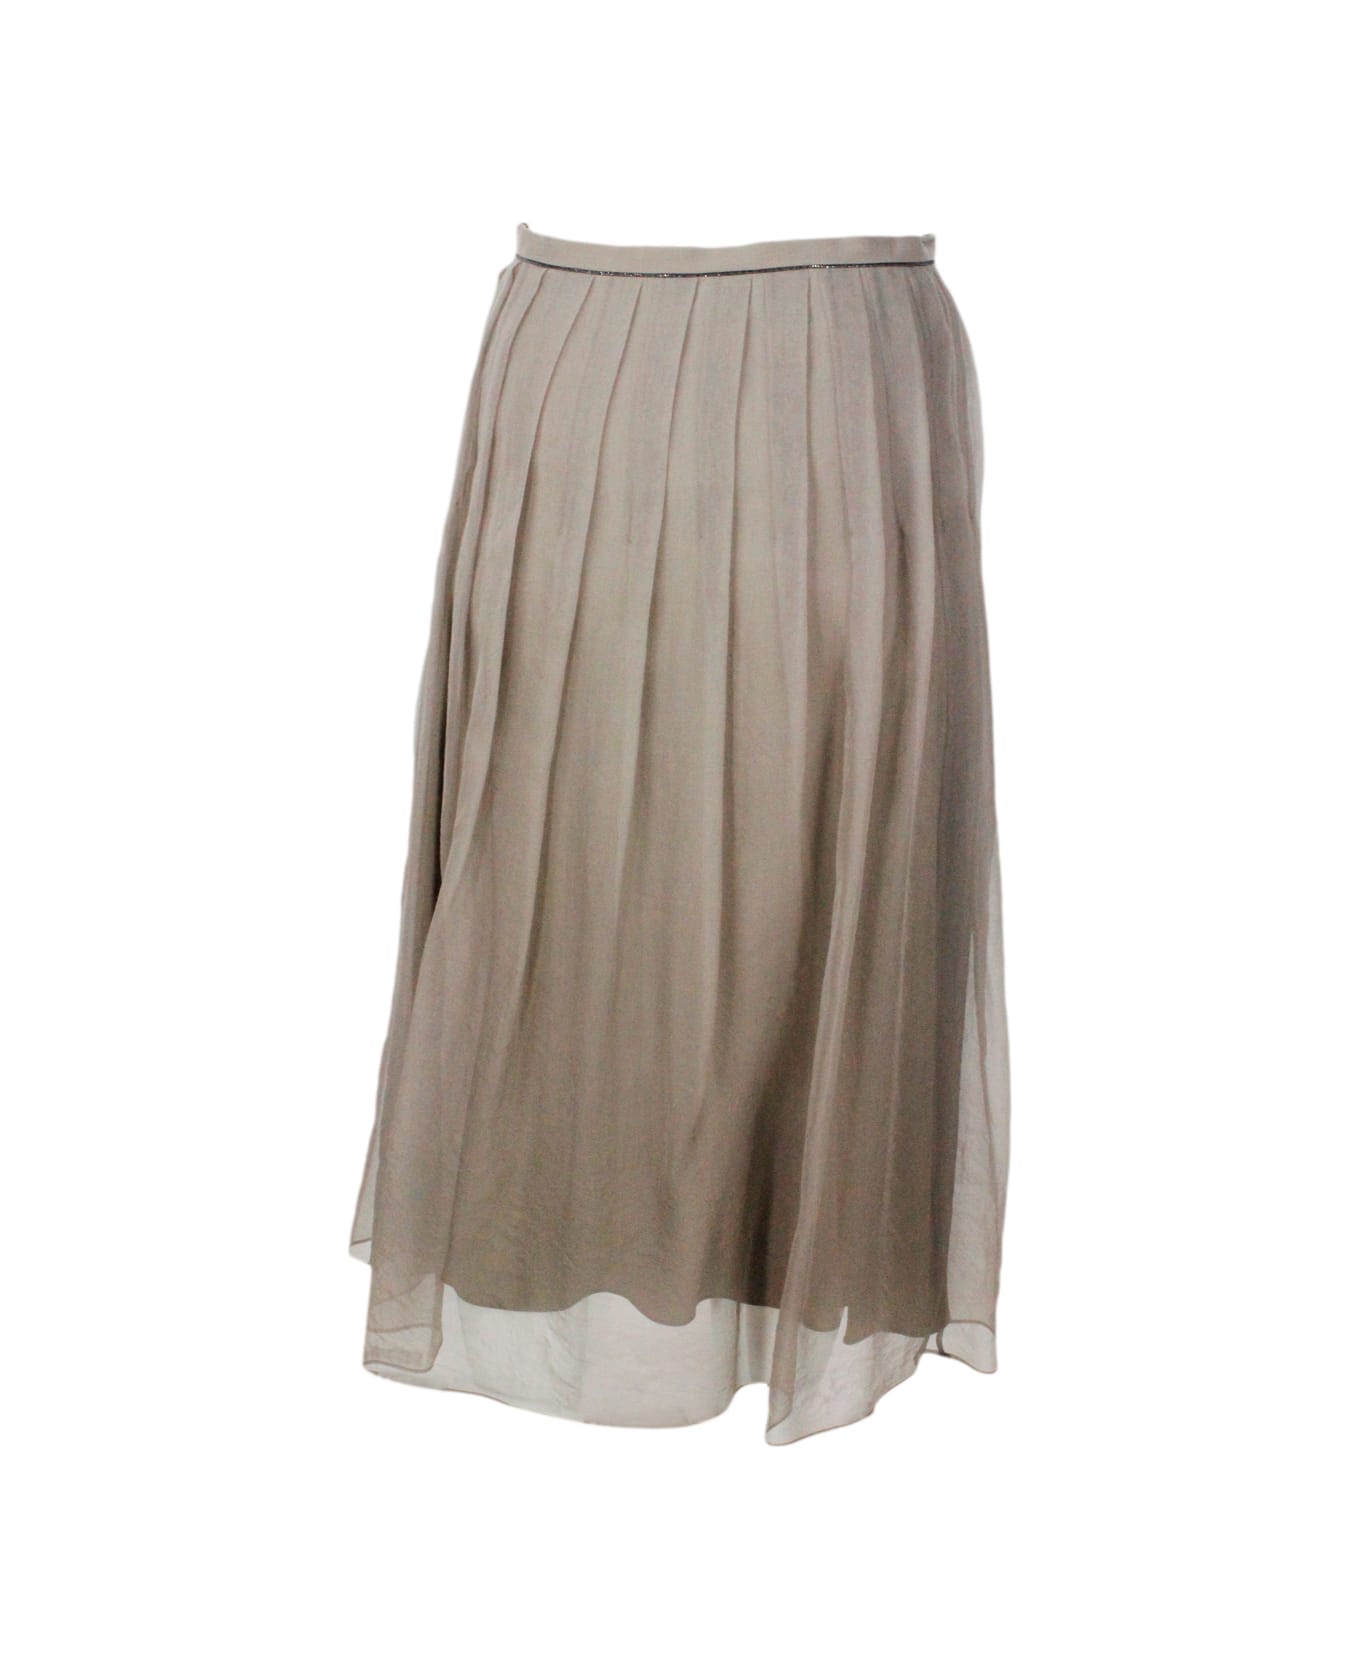 Brunello Cucinelli Long Pleated Skirt Made Of Fine Silk With Underlying Lining. Side Zip Closure And Shiny Jewel On The Strap - Nut